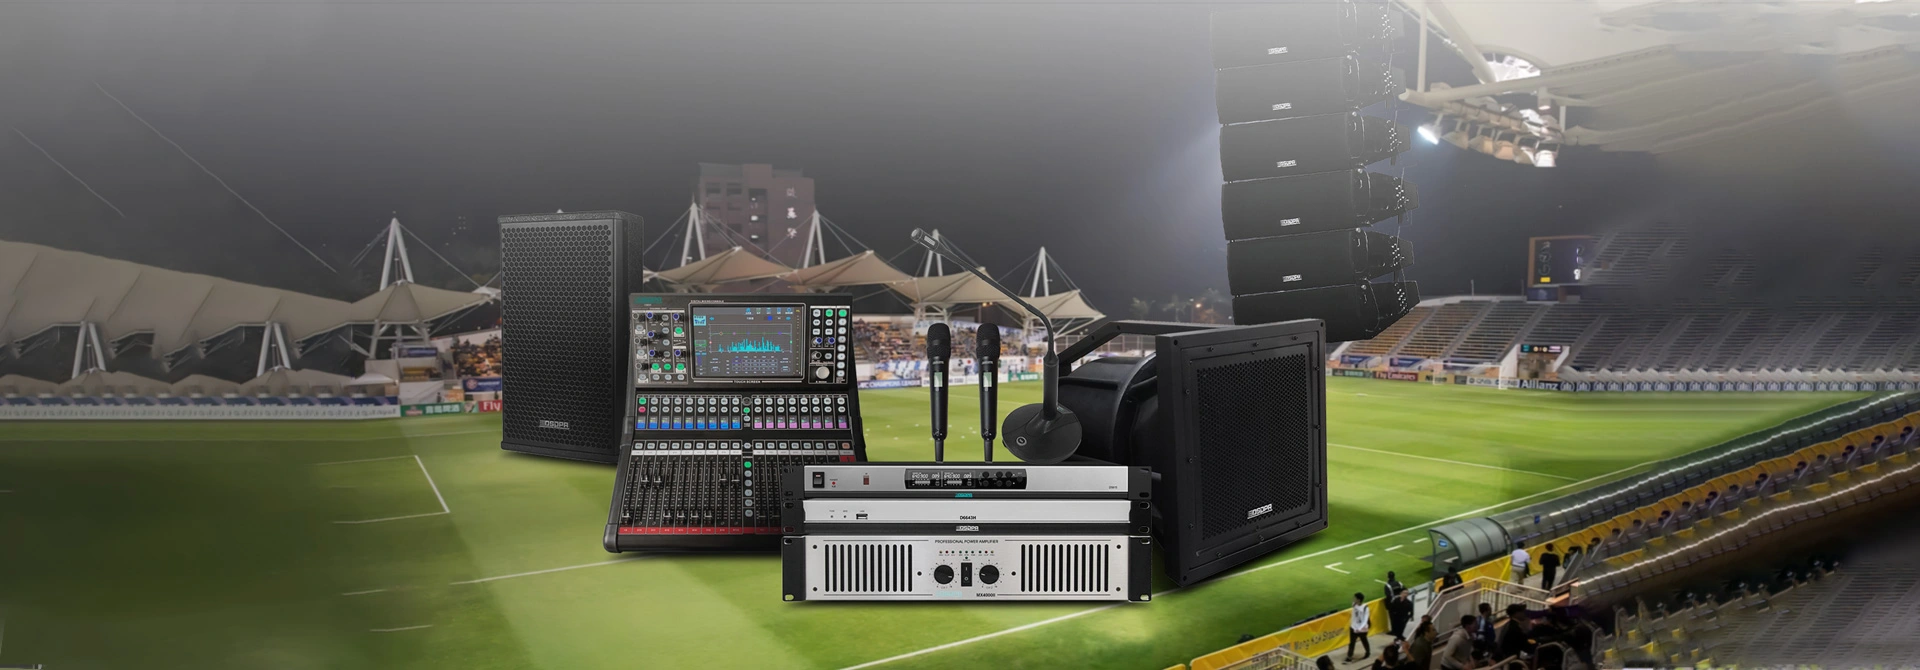 Professional Sound System Solution for a Football Stadium